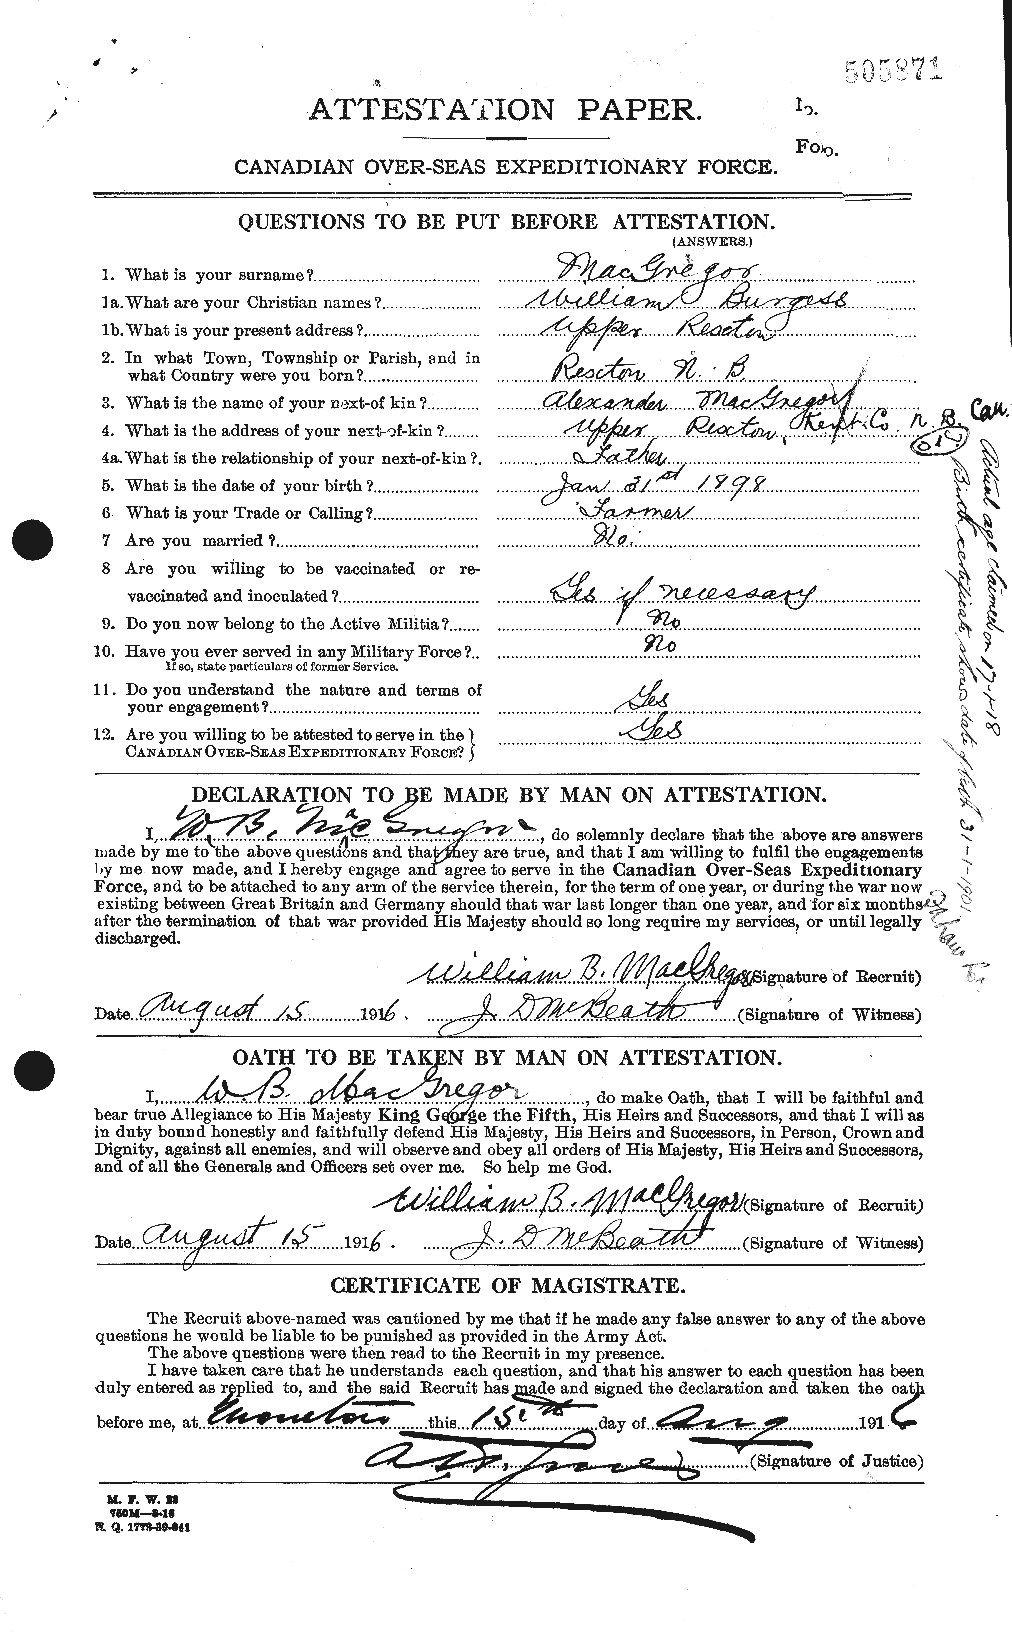 Personnel Records of the First World War - CEF 527987a